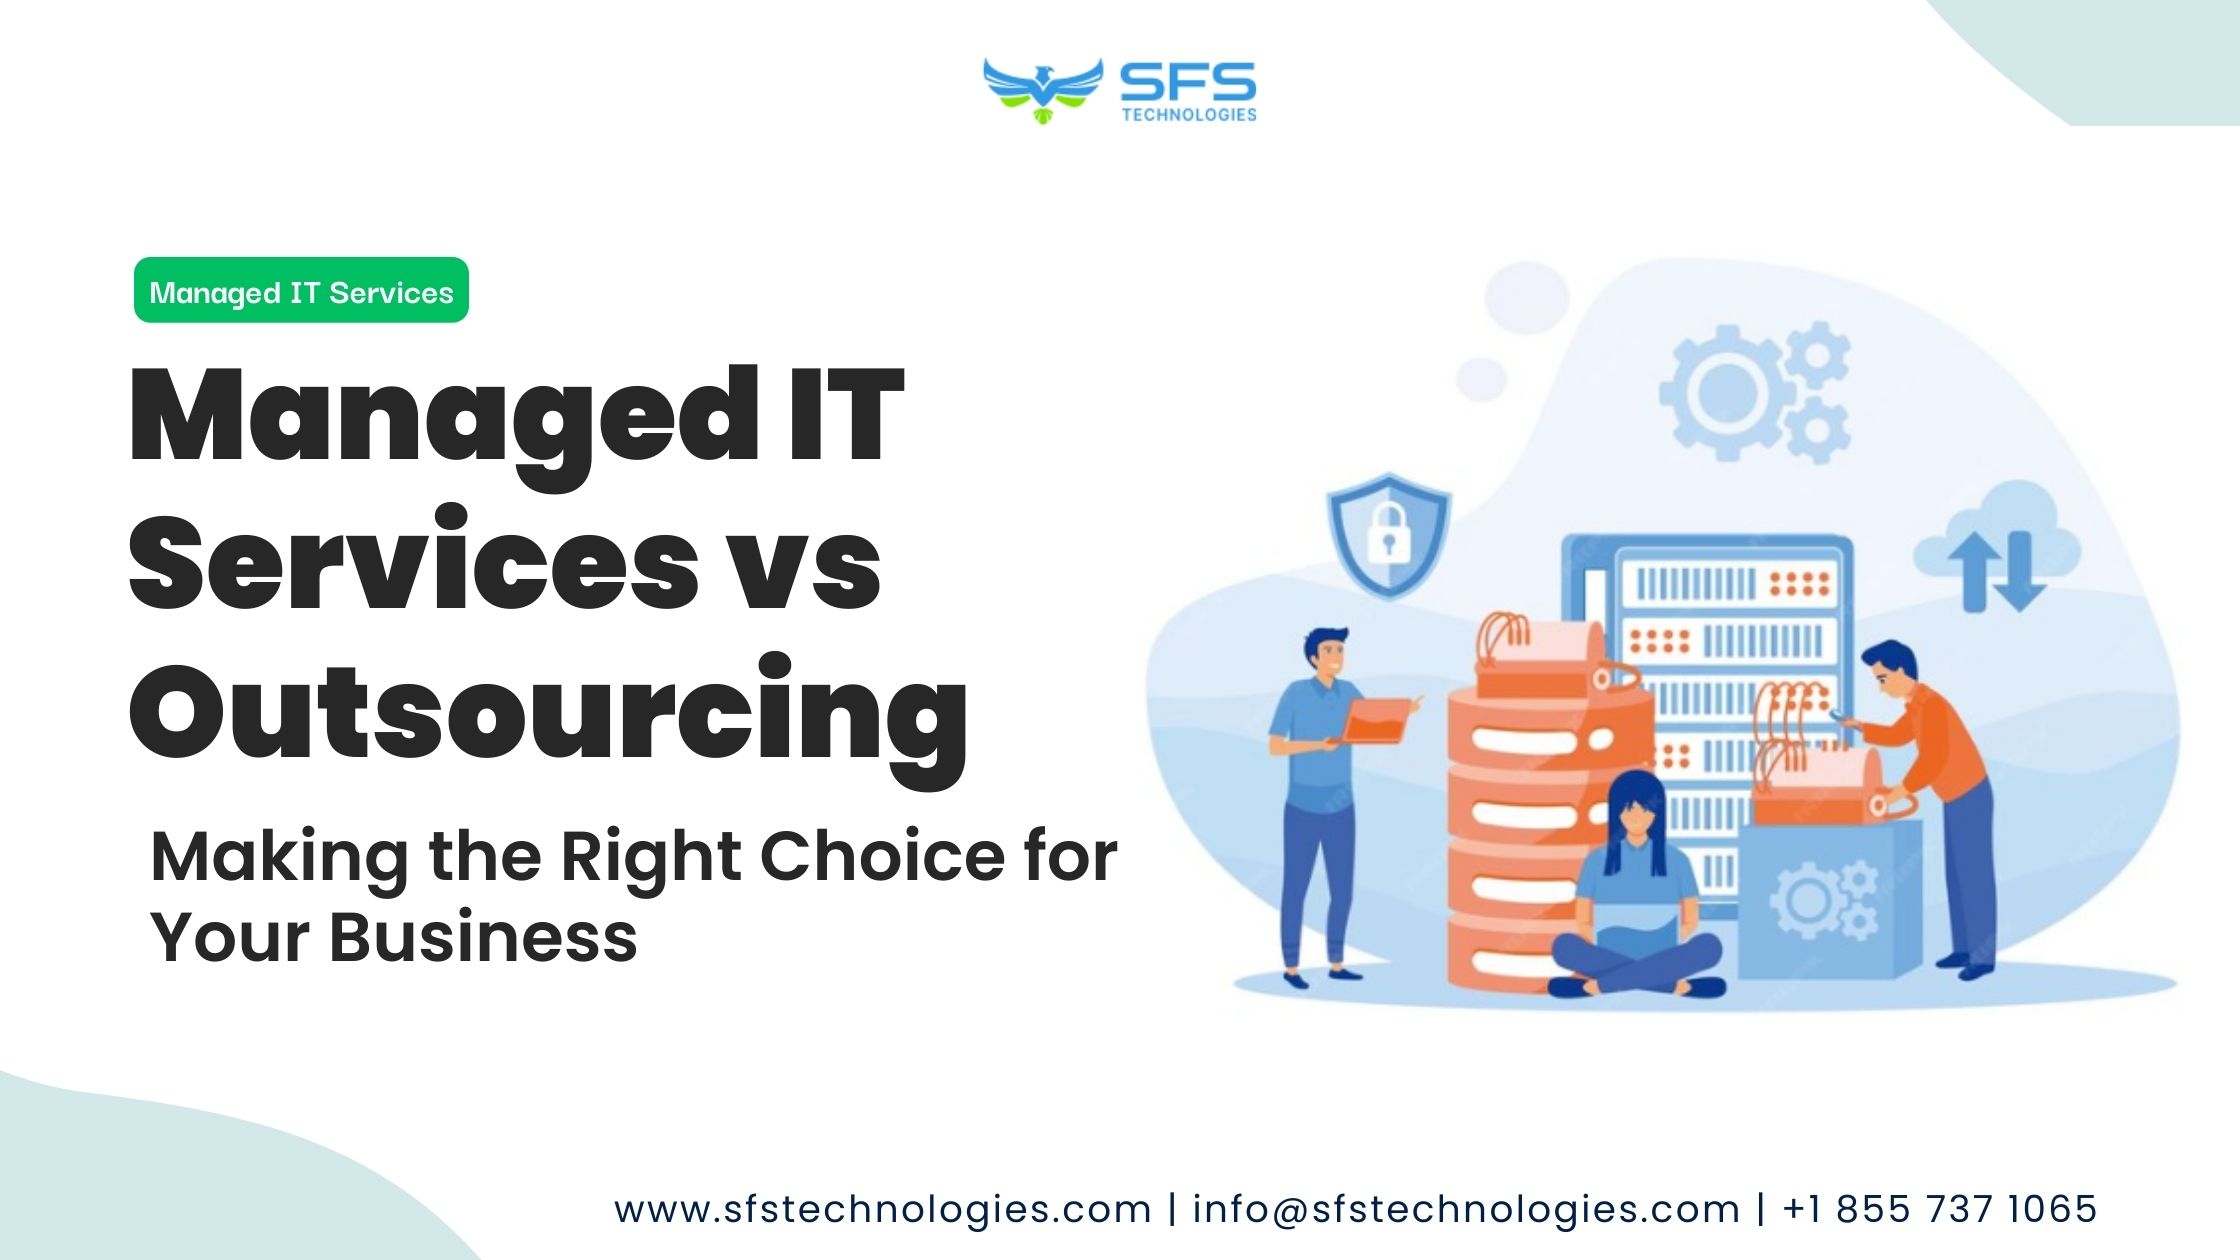 Managed IT Services vs Outsourcing